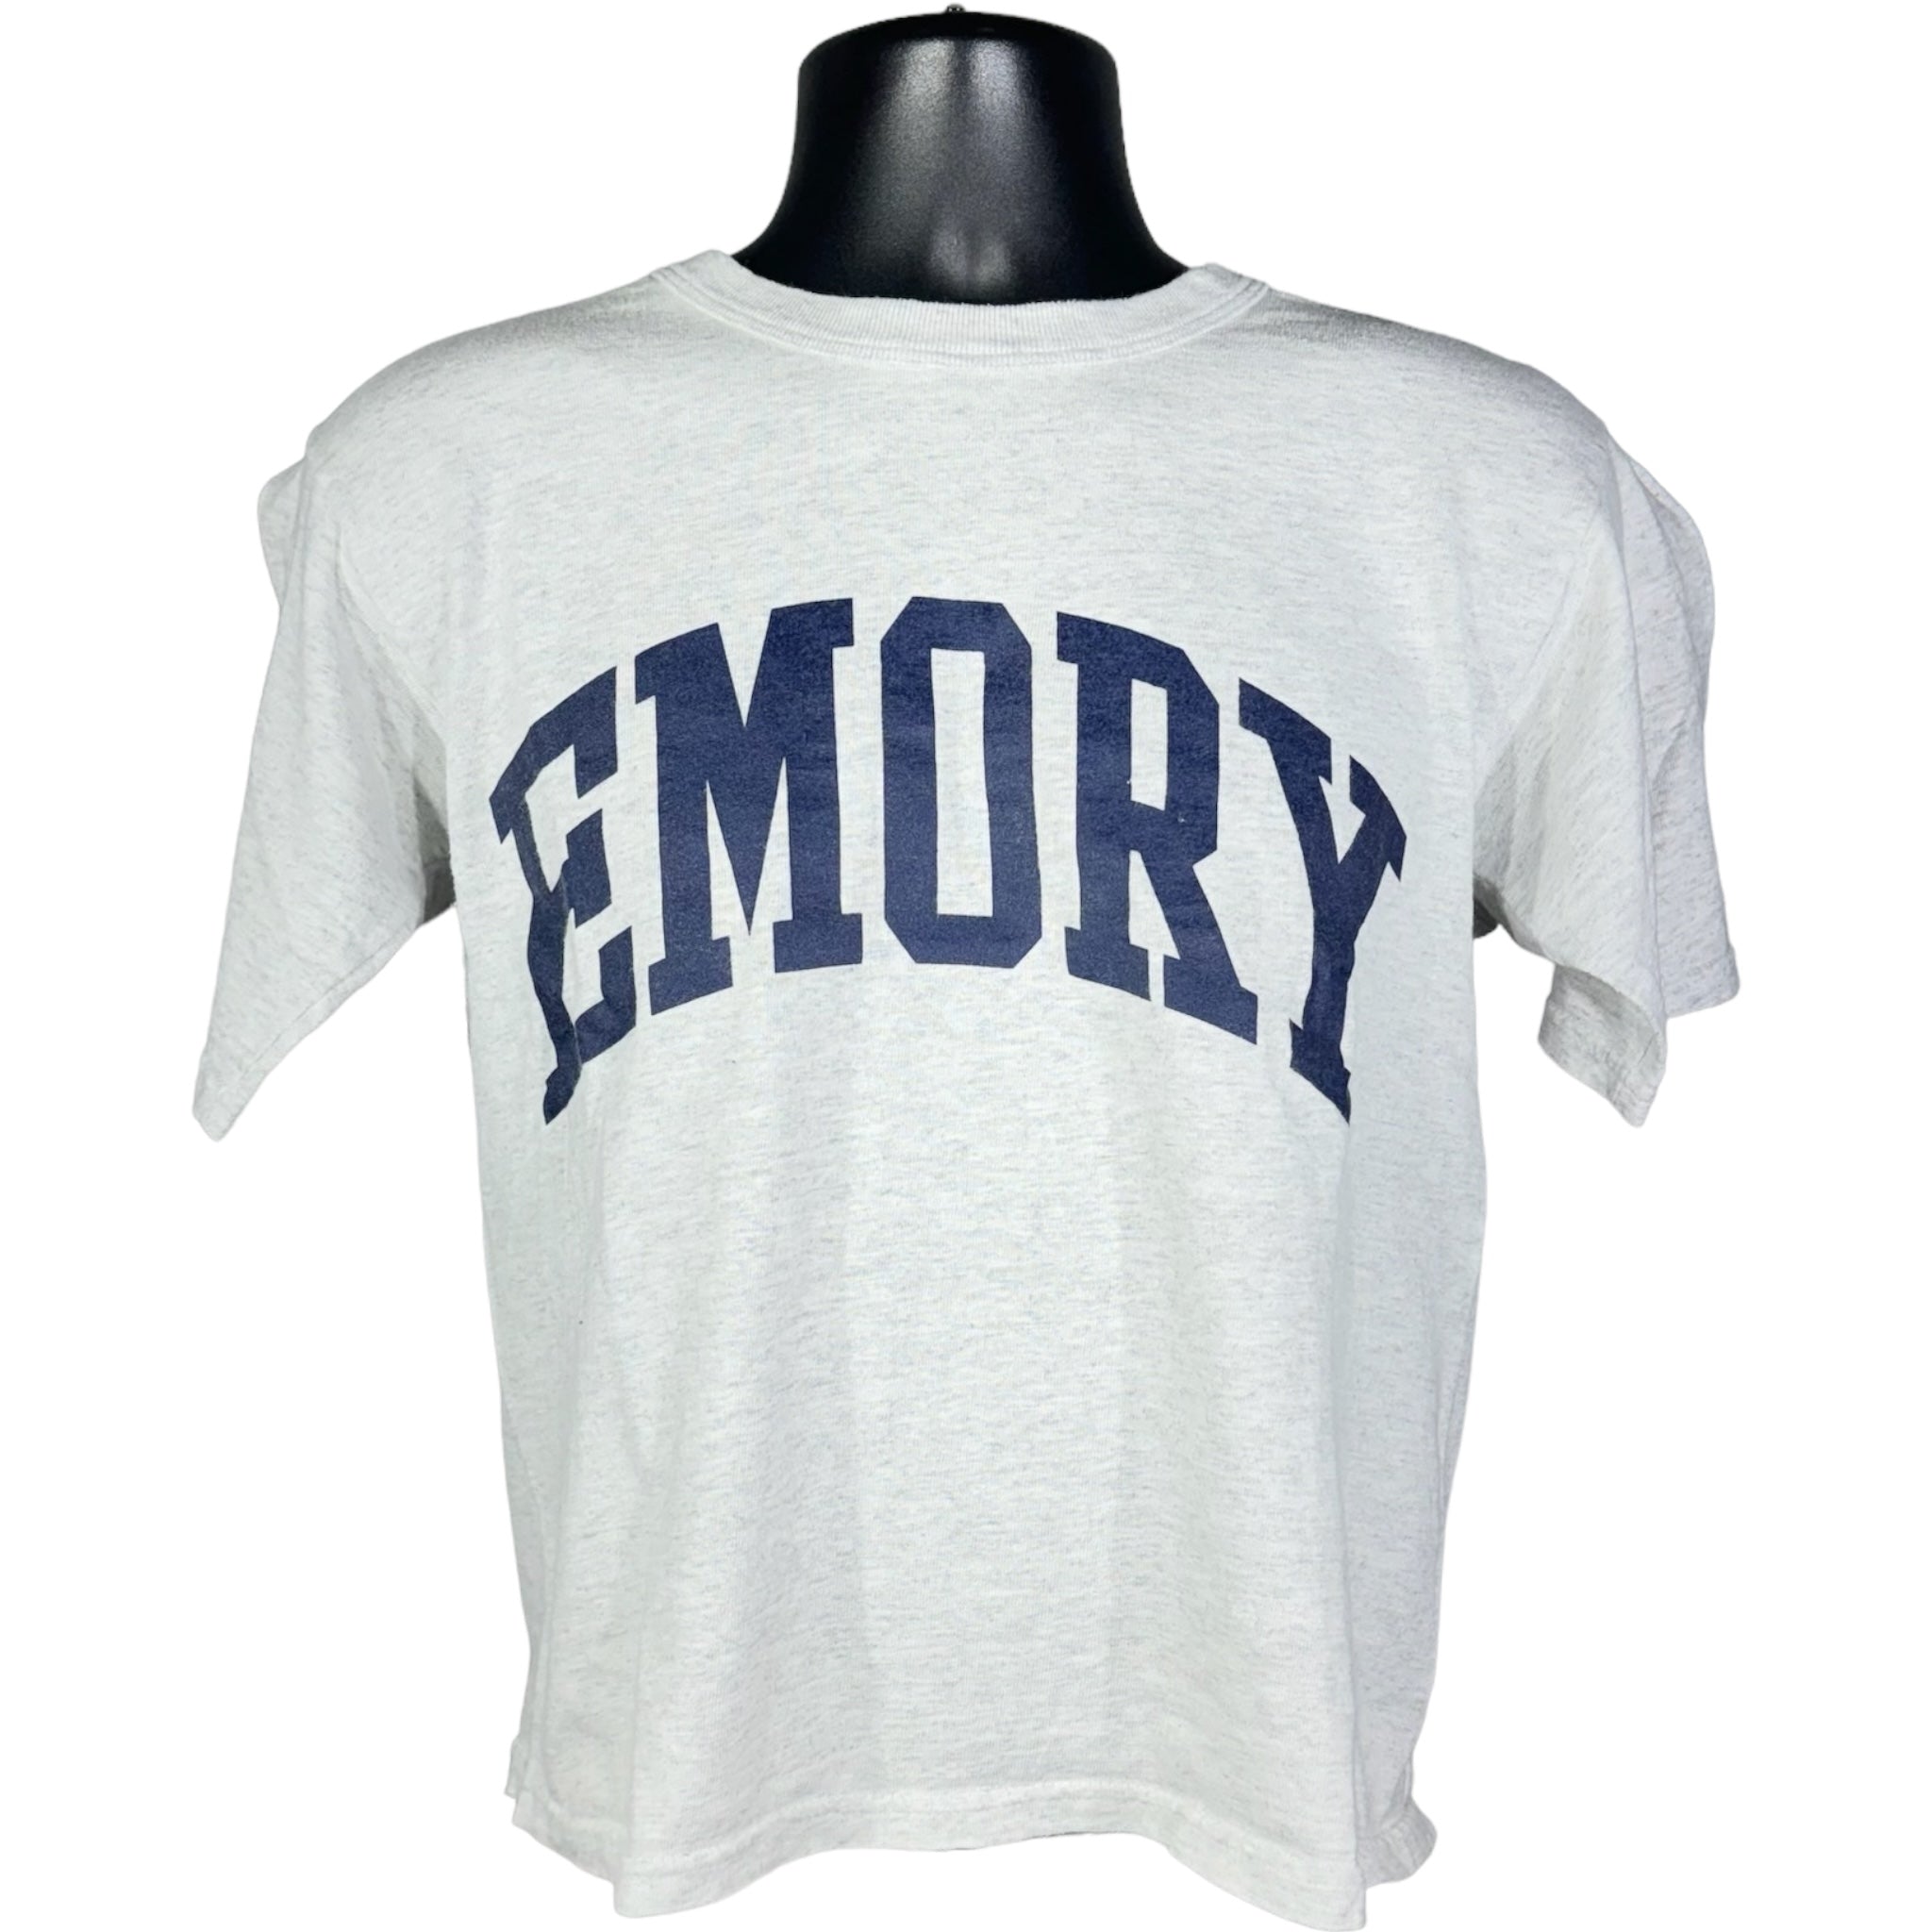 Vintage Emory University Spellout Tee